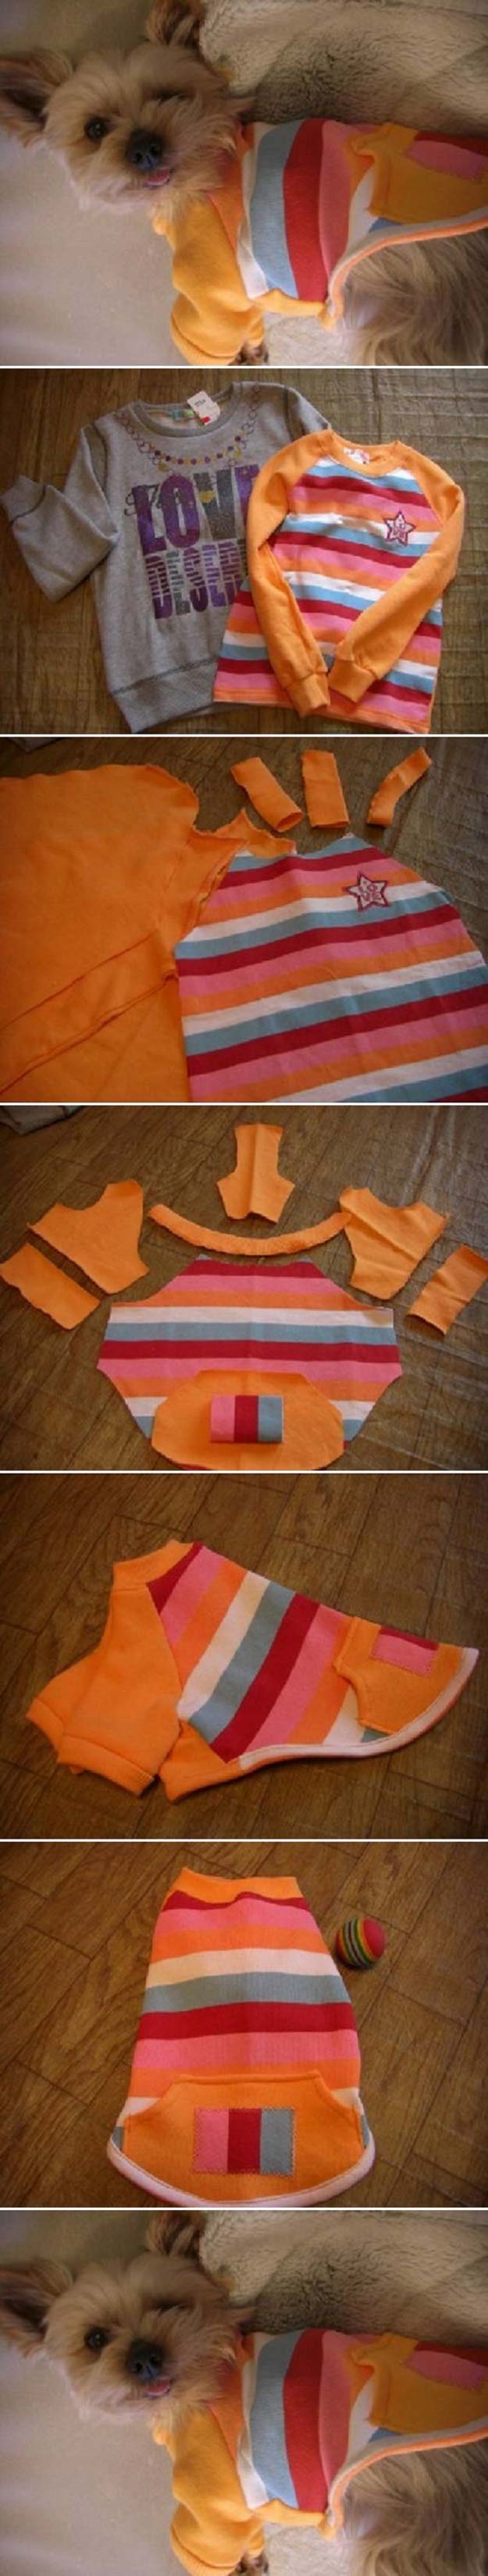 DIY Projects for Your Pet - Easy DIY Dog Sweater- Cat and Dog Beds, Treats, Collars and Easy Crafts to Make for Toys - Homemade Dog Biscuits, Food and Treats - Fun Ideas for Teen, Tweens and Adults to Make for Pets 